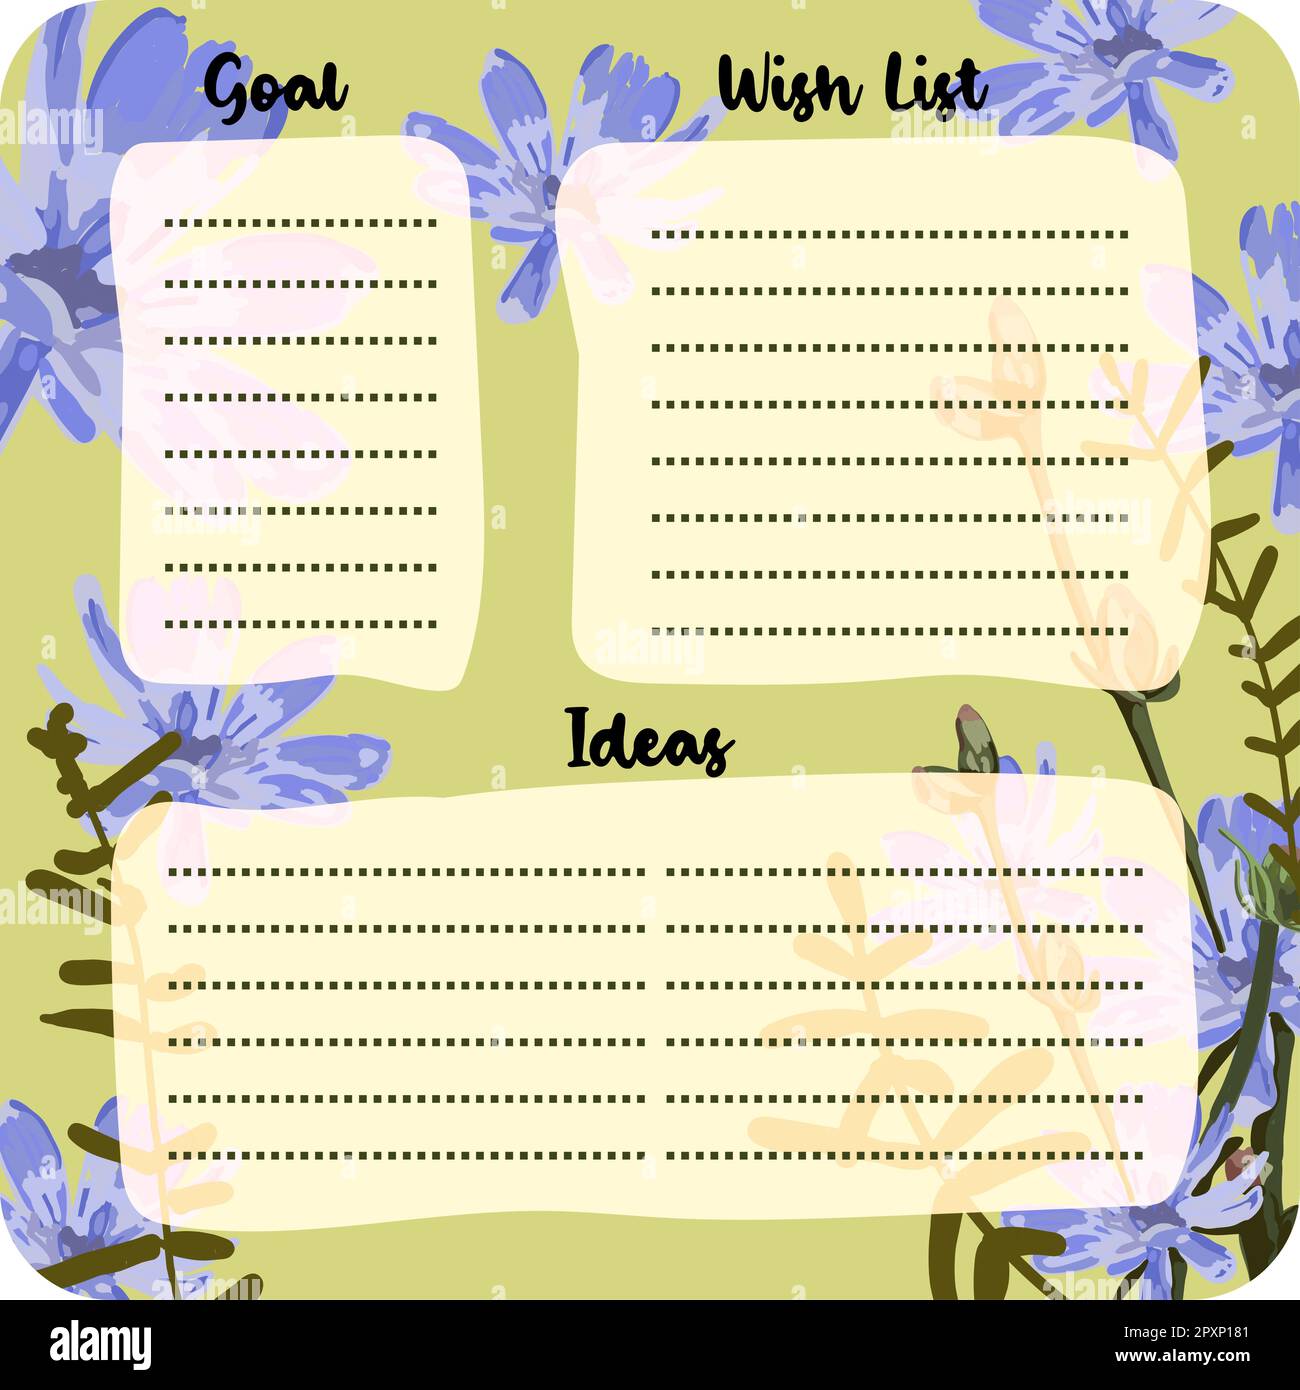 Achieve Your Goals with Butterfly Habit Trackers